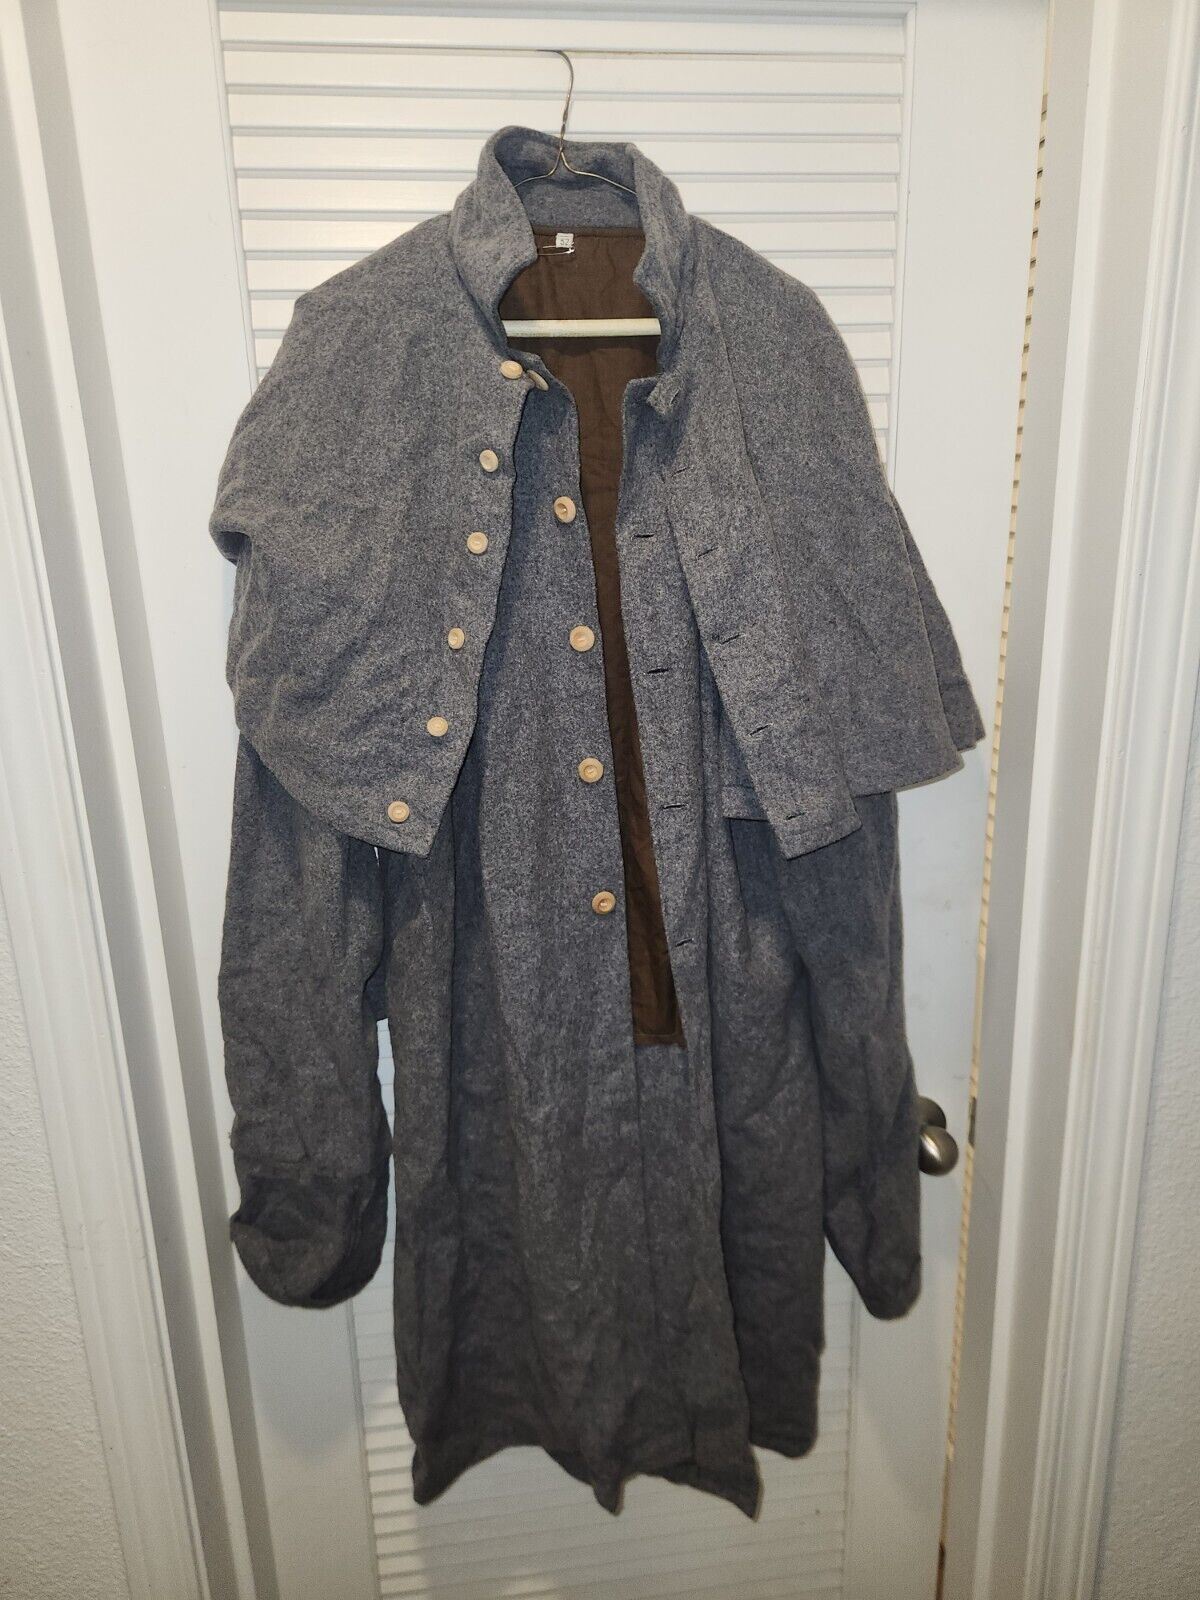 Confederate Gray Wool Great Coat With Wooden Buttons For Civil War Reenacting...